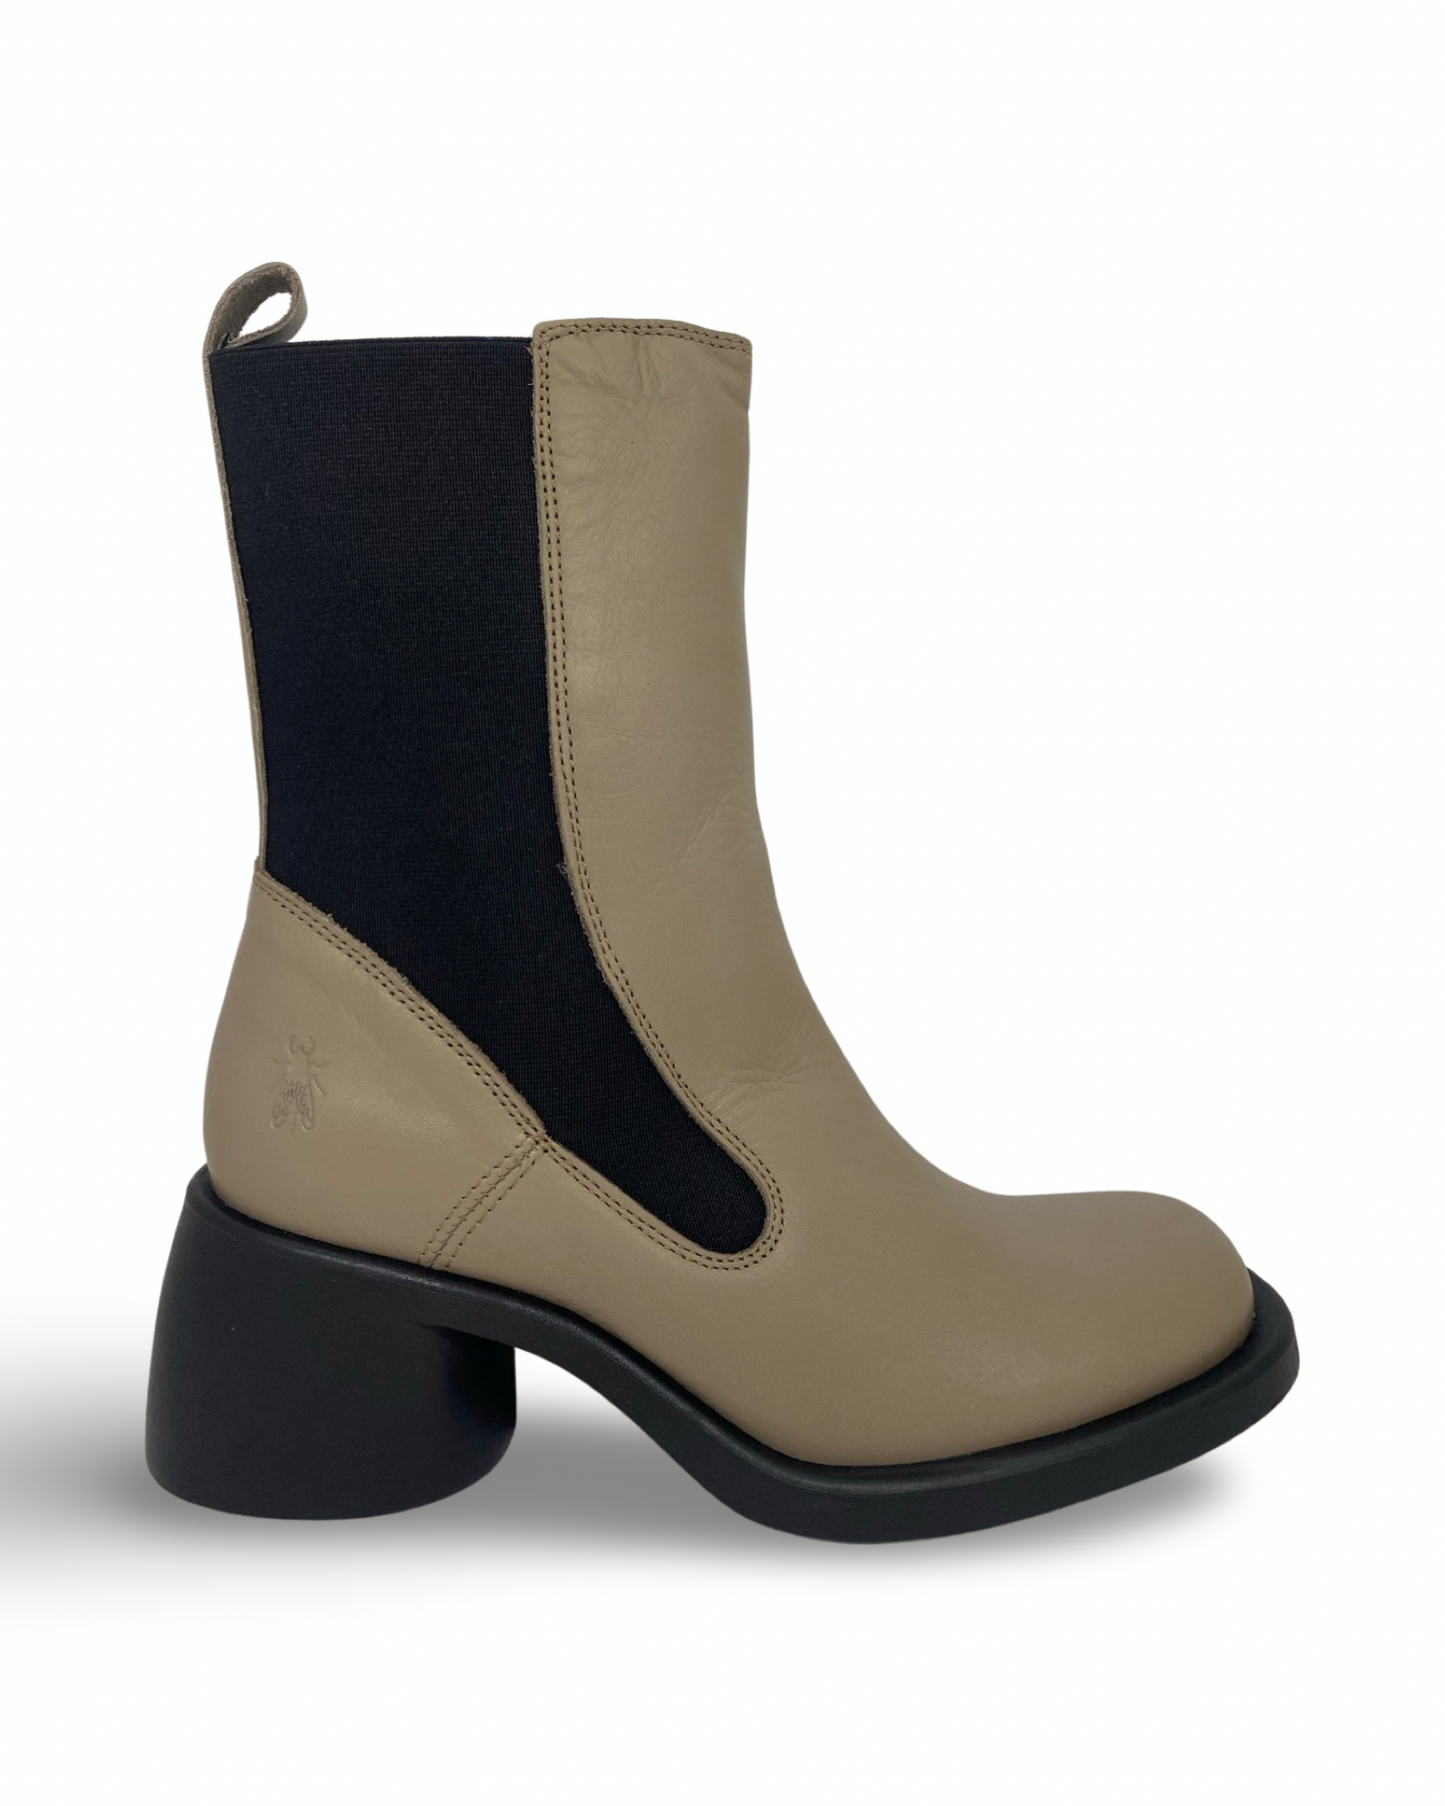 Howi Boot By Fly London - Taupe